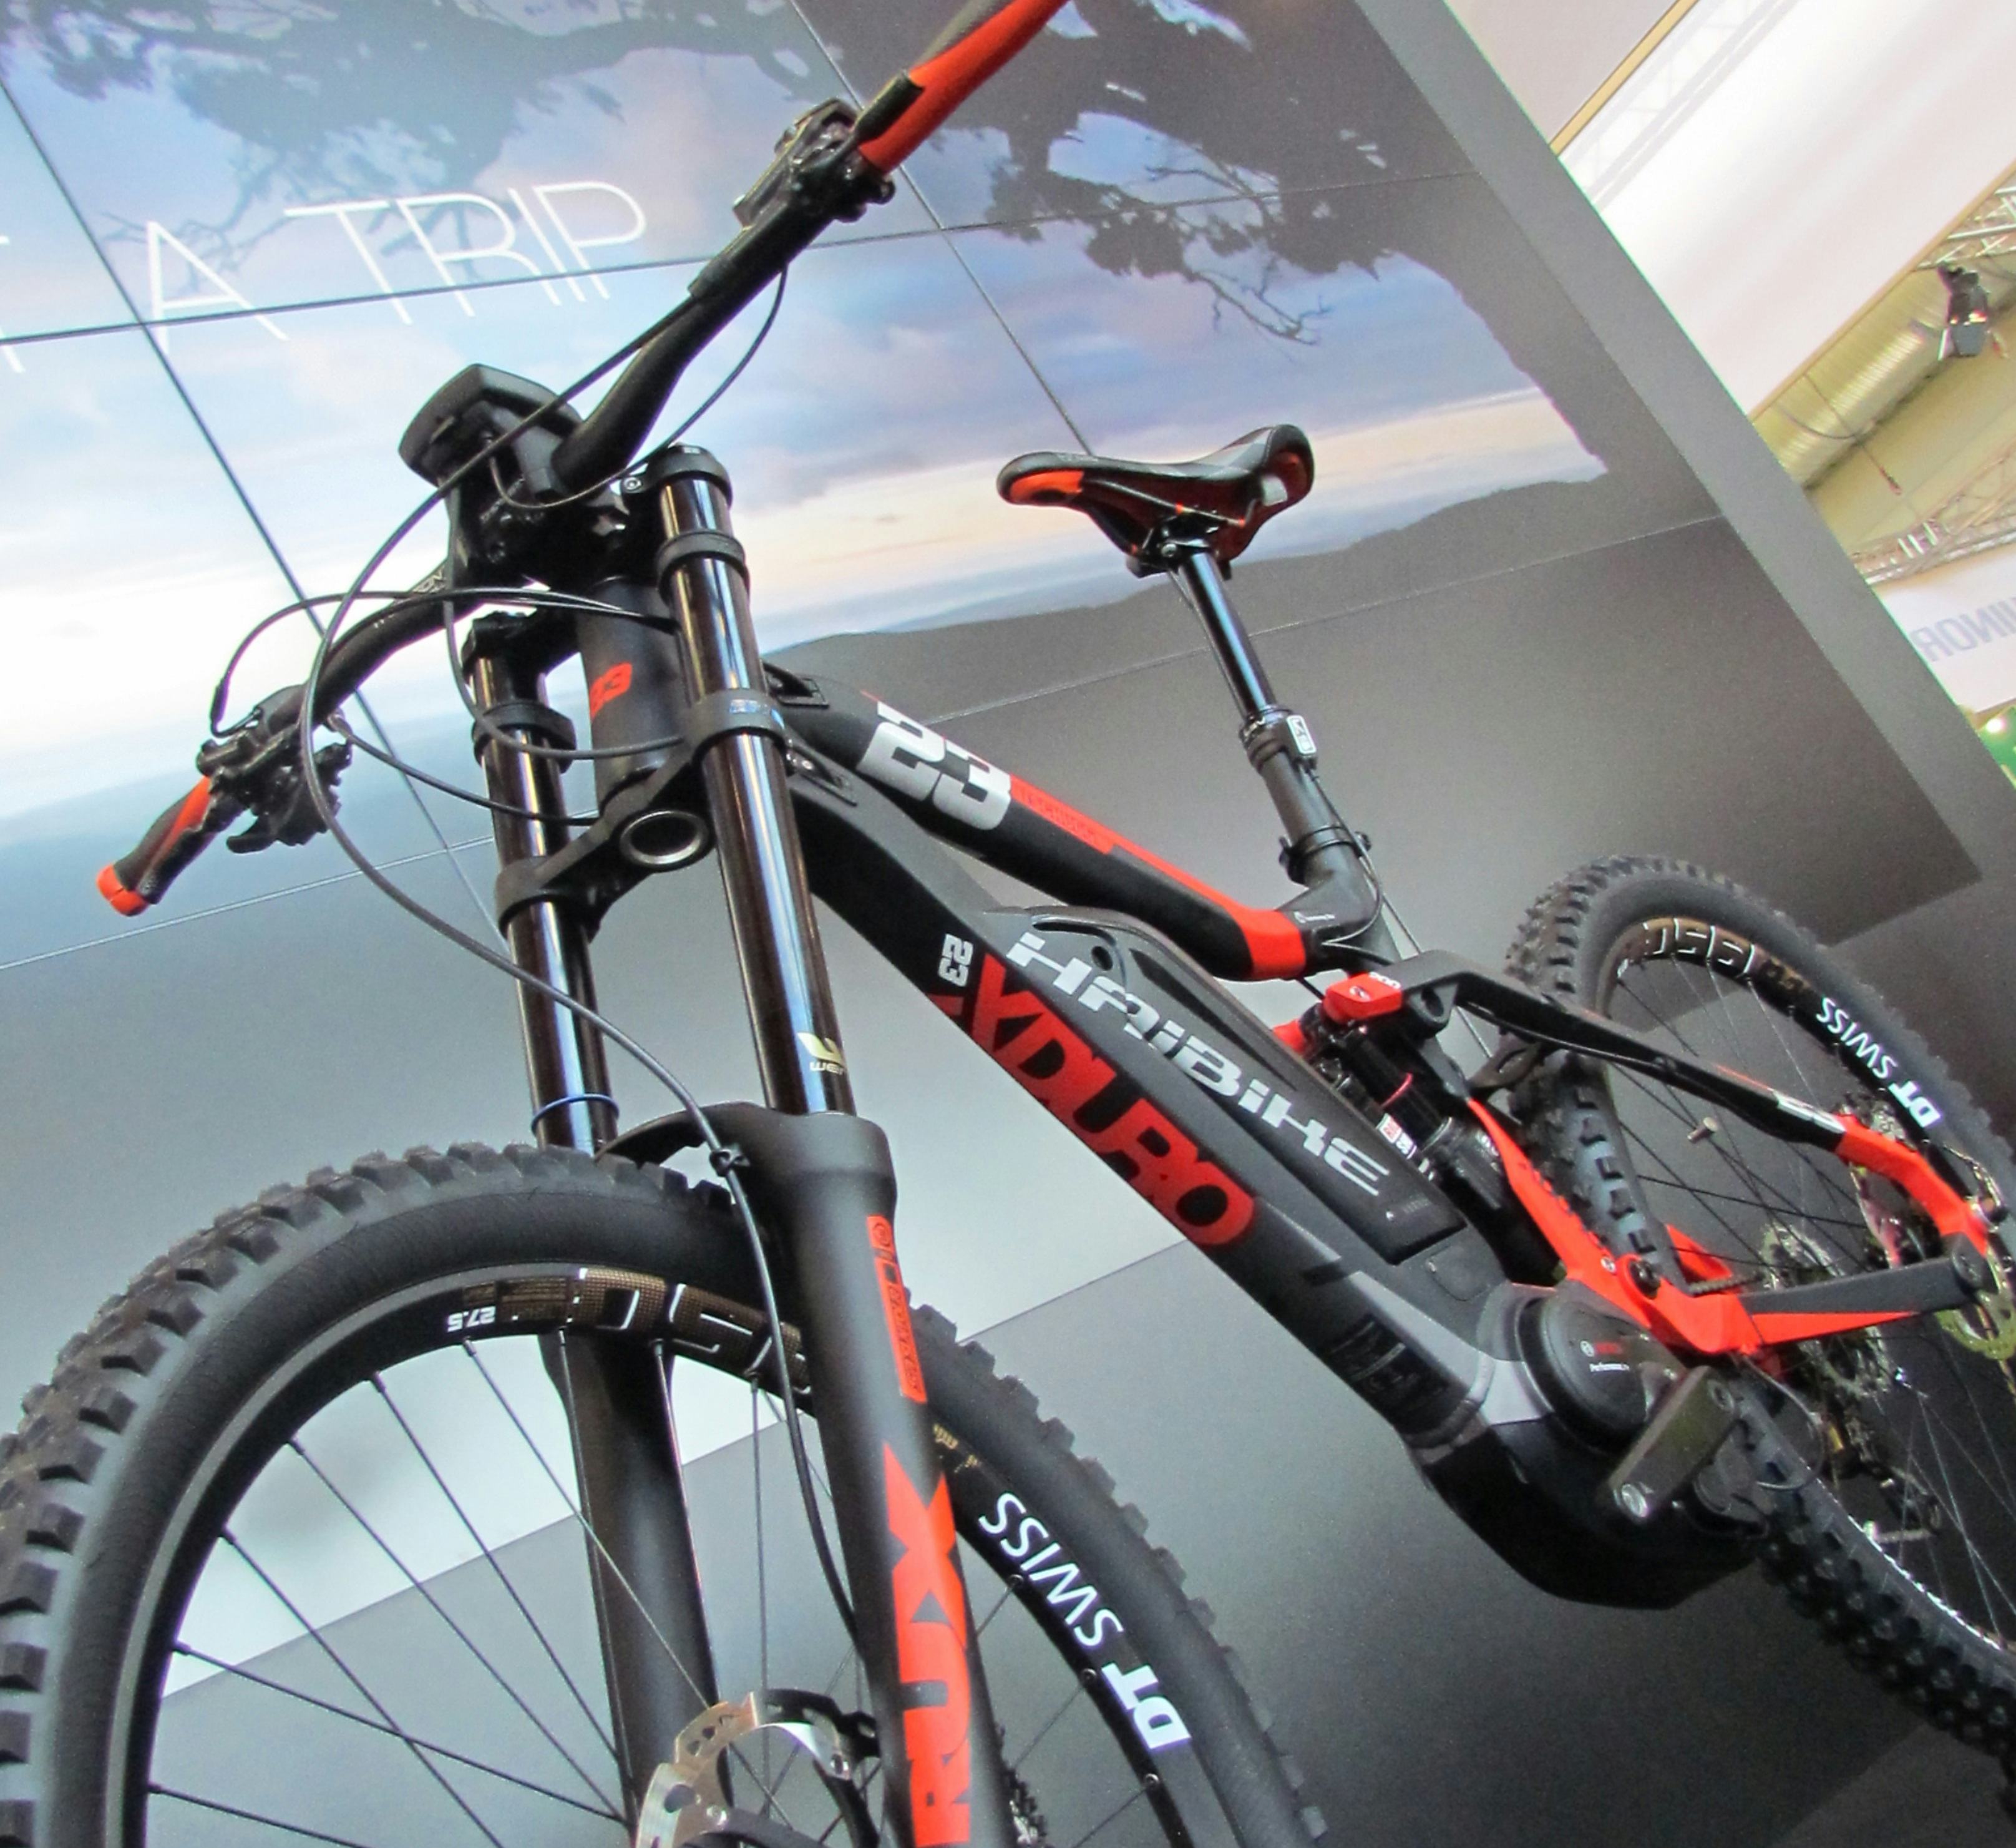 E-Mountaibikes like this one that Haibike presented at Eurobike are specifically named as THE category that saw strong growth in sales. – Photo Bike Europe